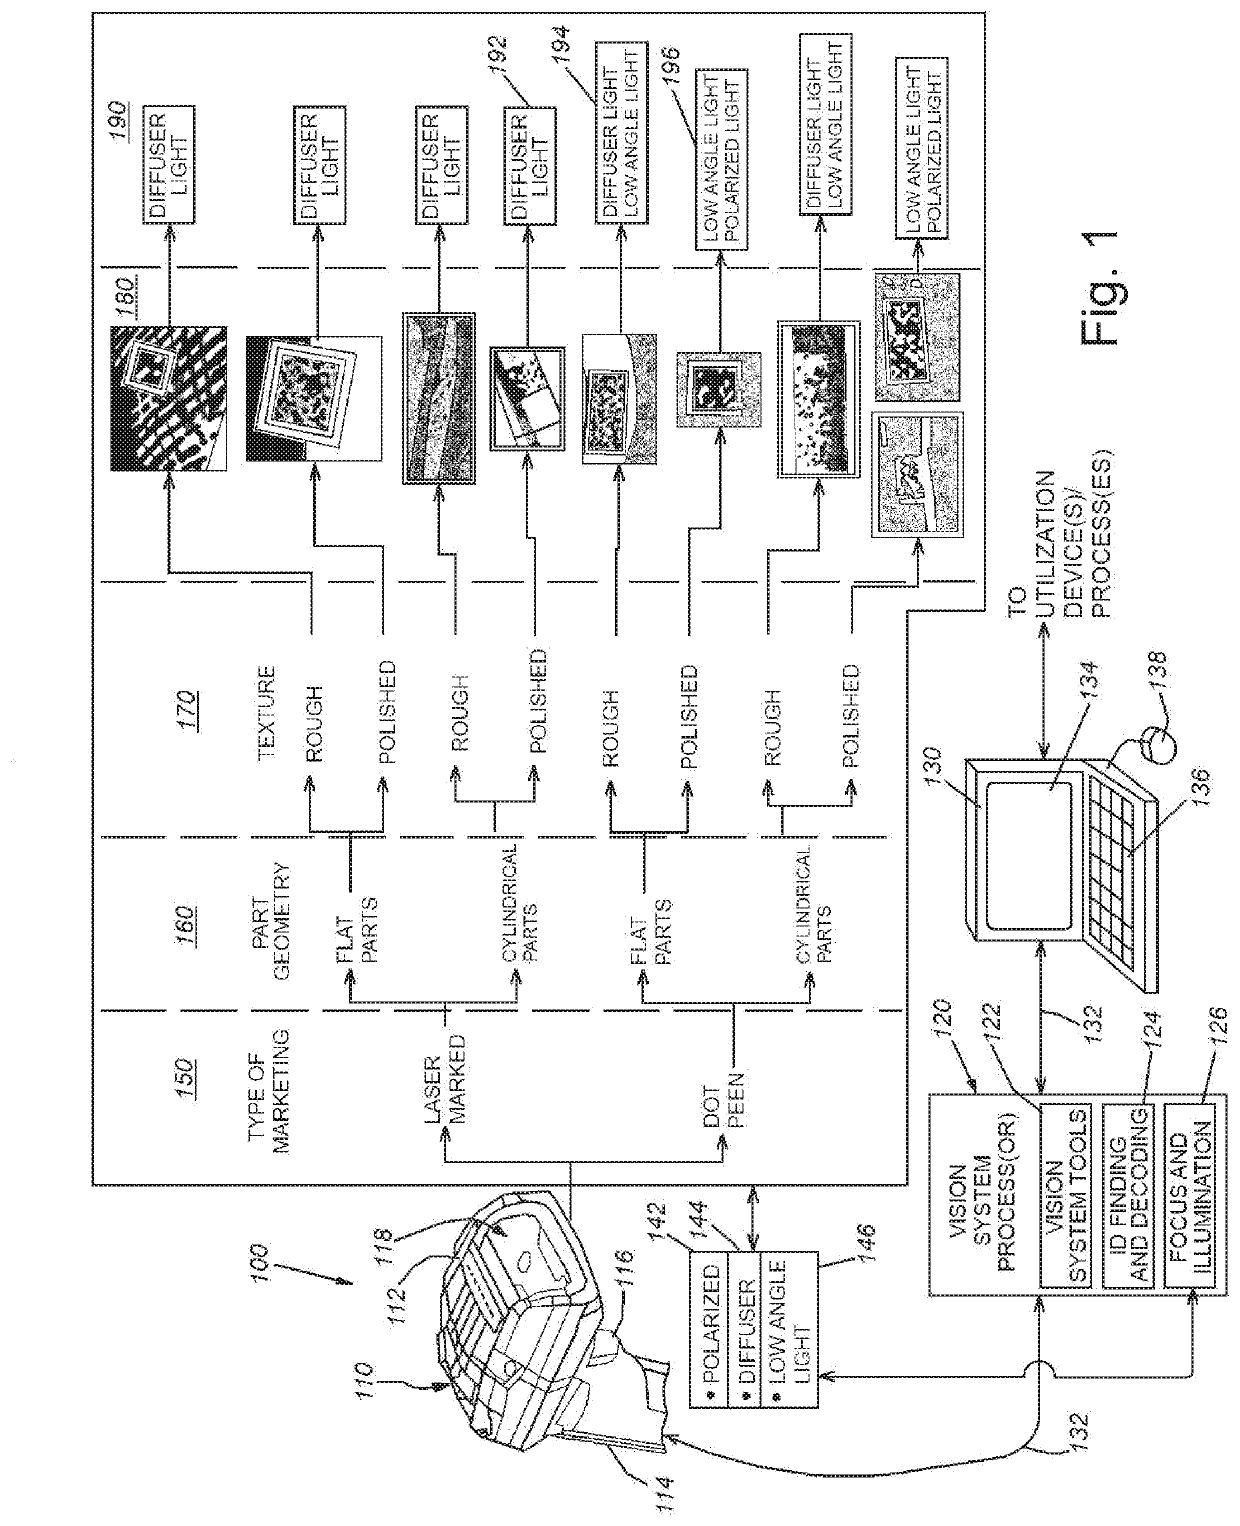 Handheld id-reading system with integrated illumination assembly